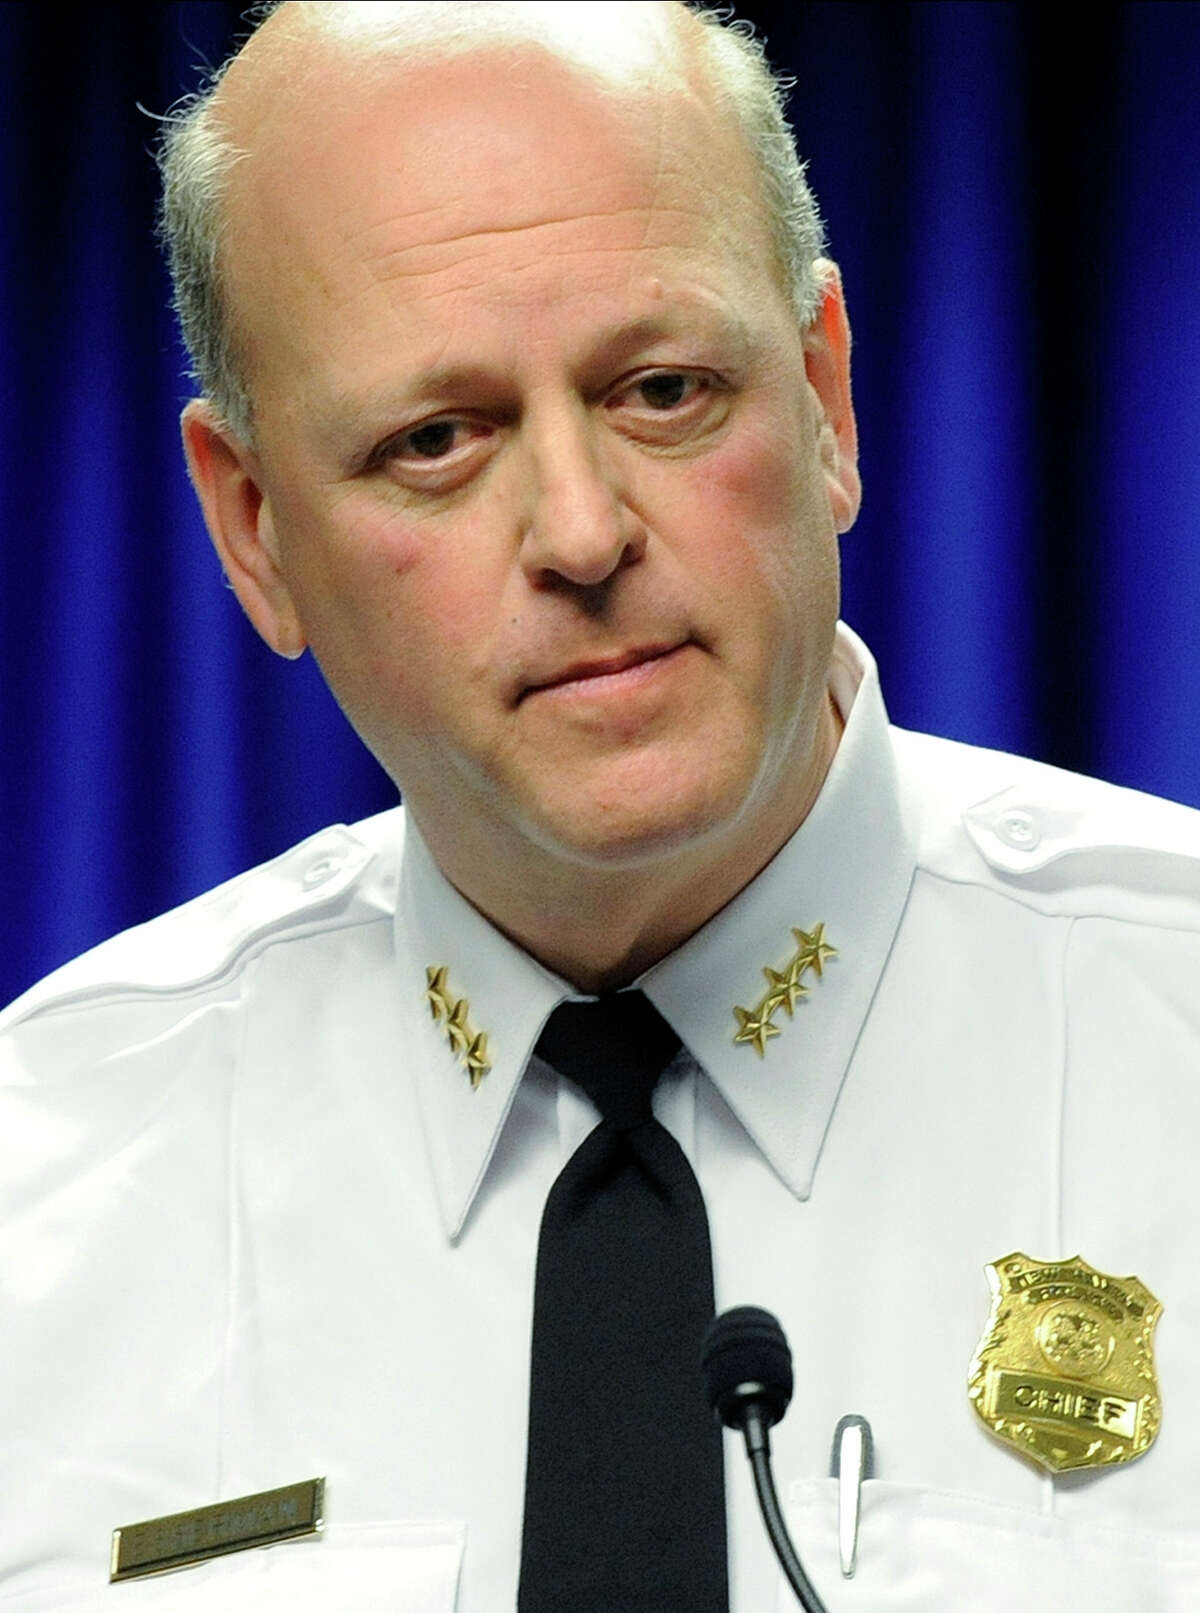 New Haven Police Chief Dean Esserman speaks at 2012 news conference about a new effort to reduce gun violence. Esserman is on a three-week paid leave of absence for allegedly berating a waitress in July.